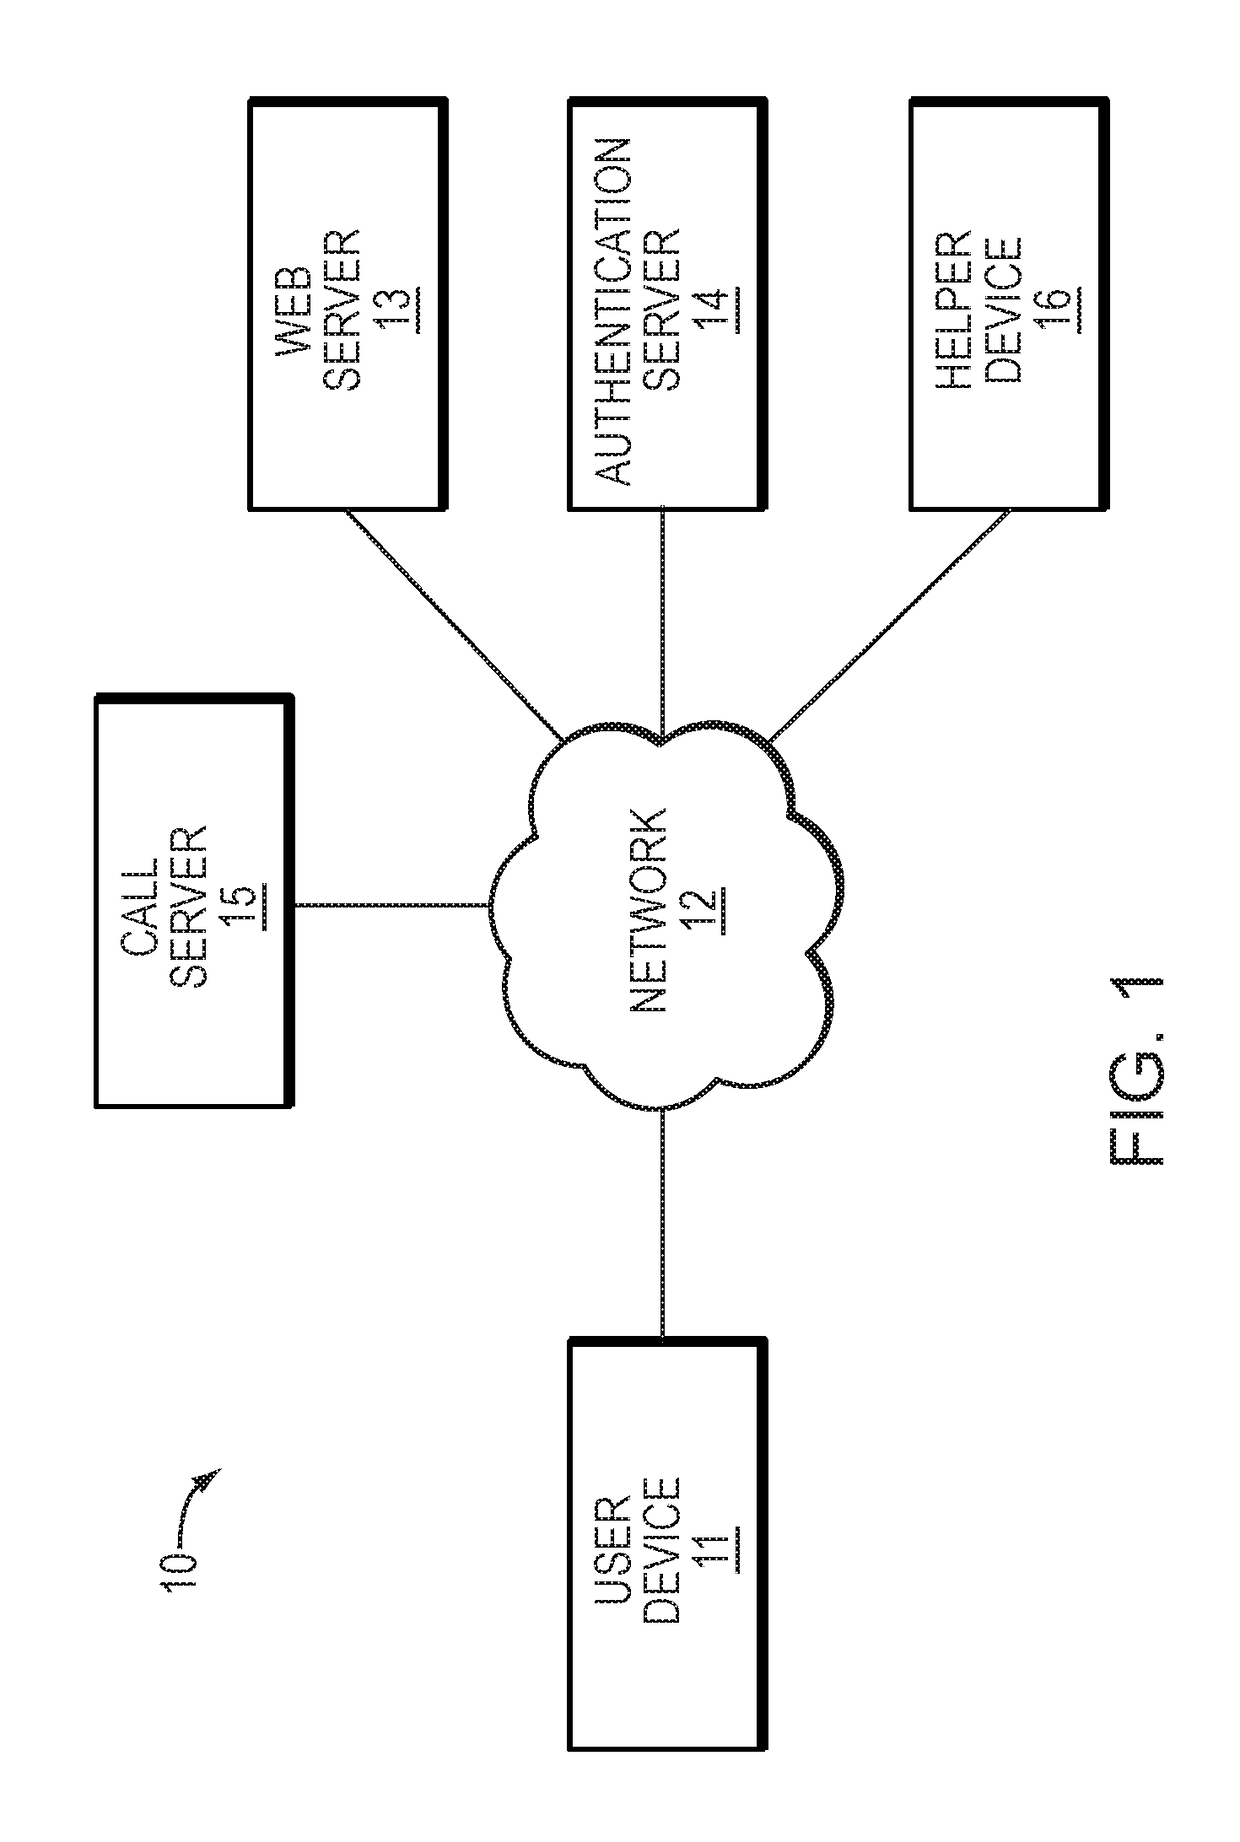 Method, apparatus and computer program product for determining whether to establish a call in a click-to-call environment